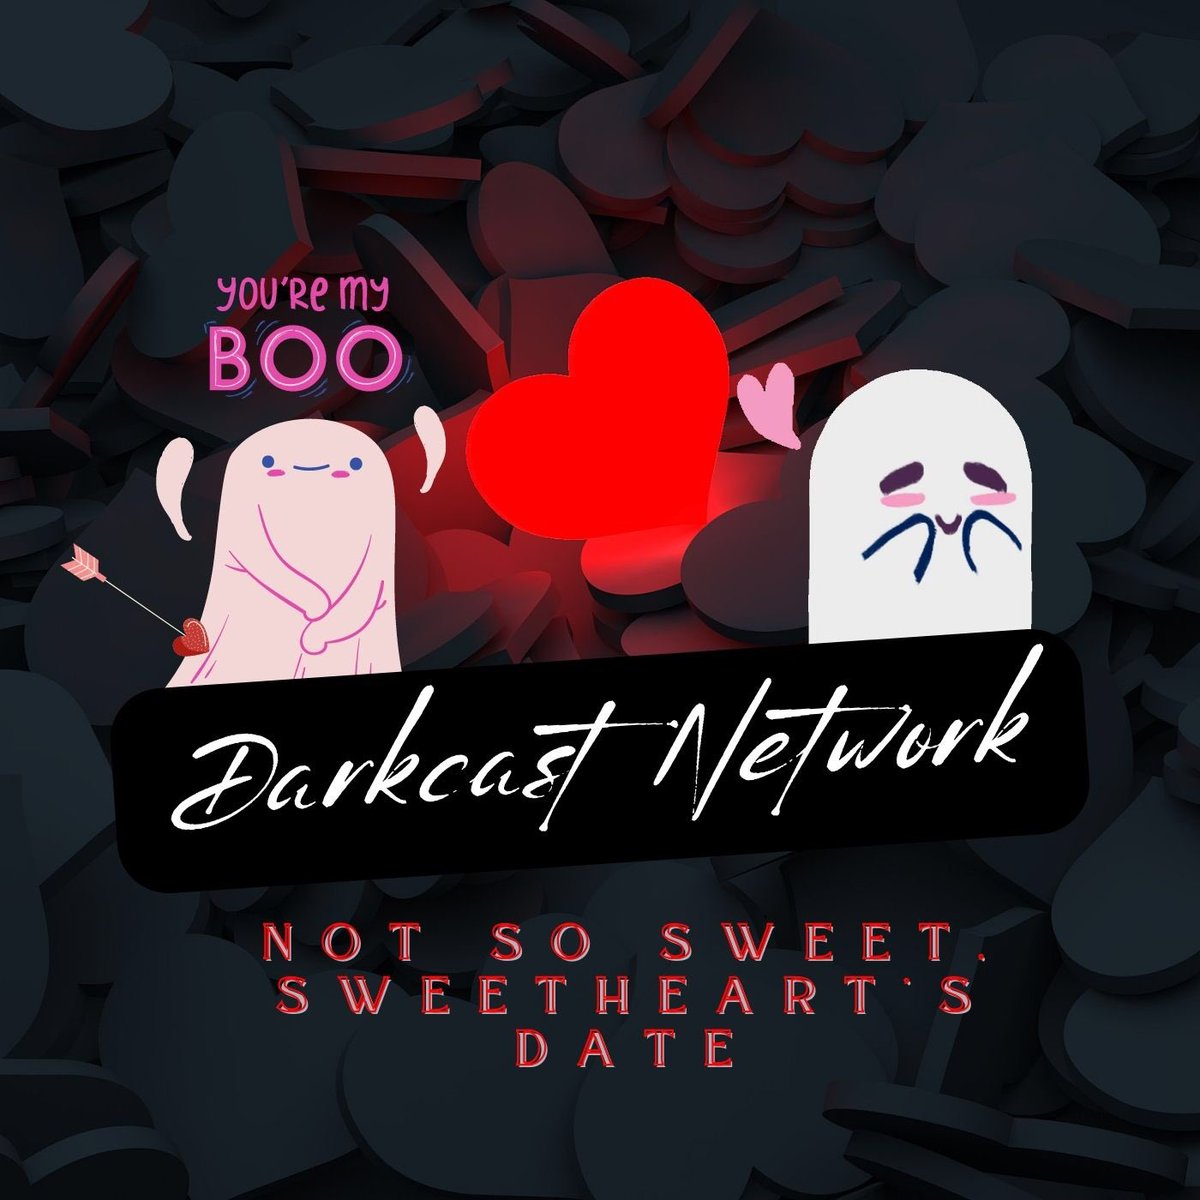 Darkcast Network invites you to a special Valentines Day date over two episodes. Head to ur favourite podcast platform for a listen. linktr.ee/CrimeDivers
#PodcastRecommendations #darkcastnetwork #14february #ValentinesDay #Valentinesspecial #podcastersunite